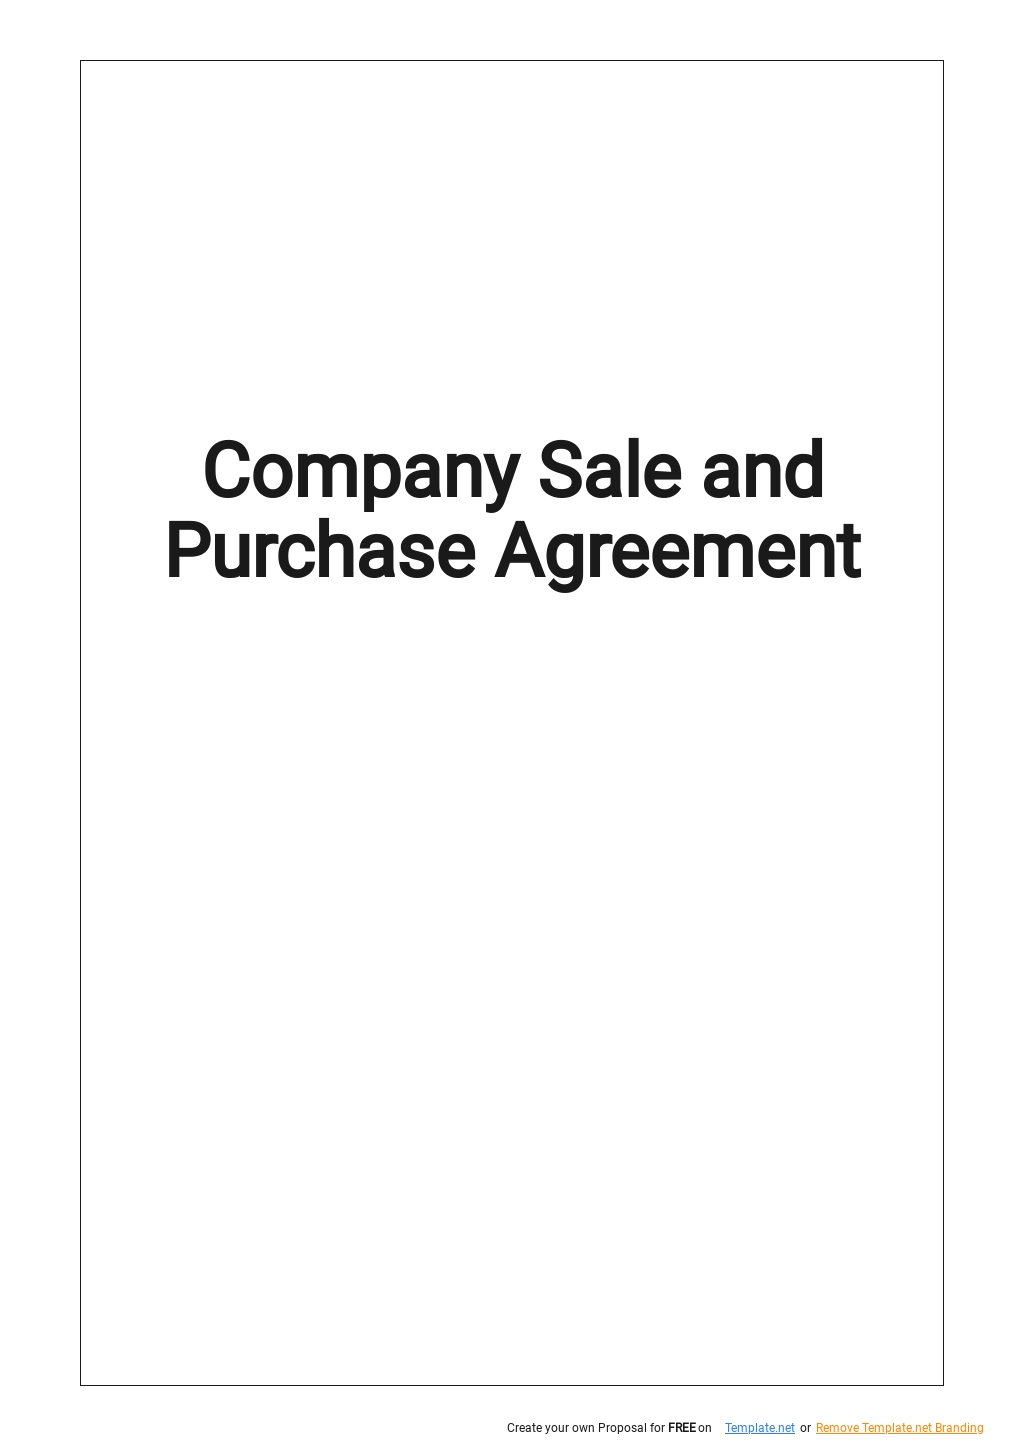 Company Sale and Purchase Agreement Template 